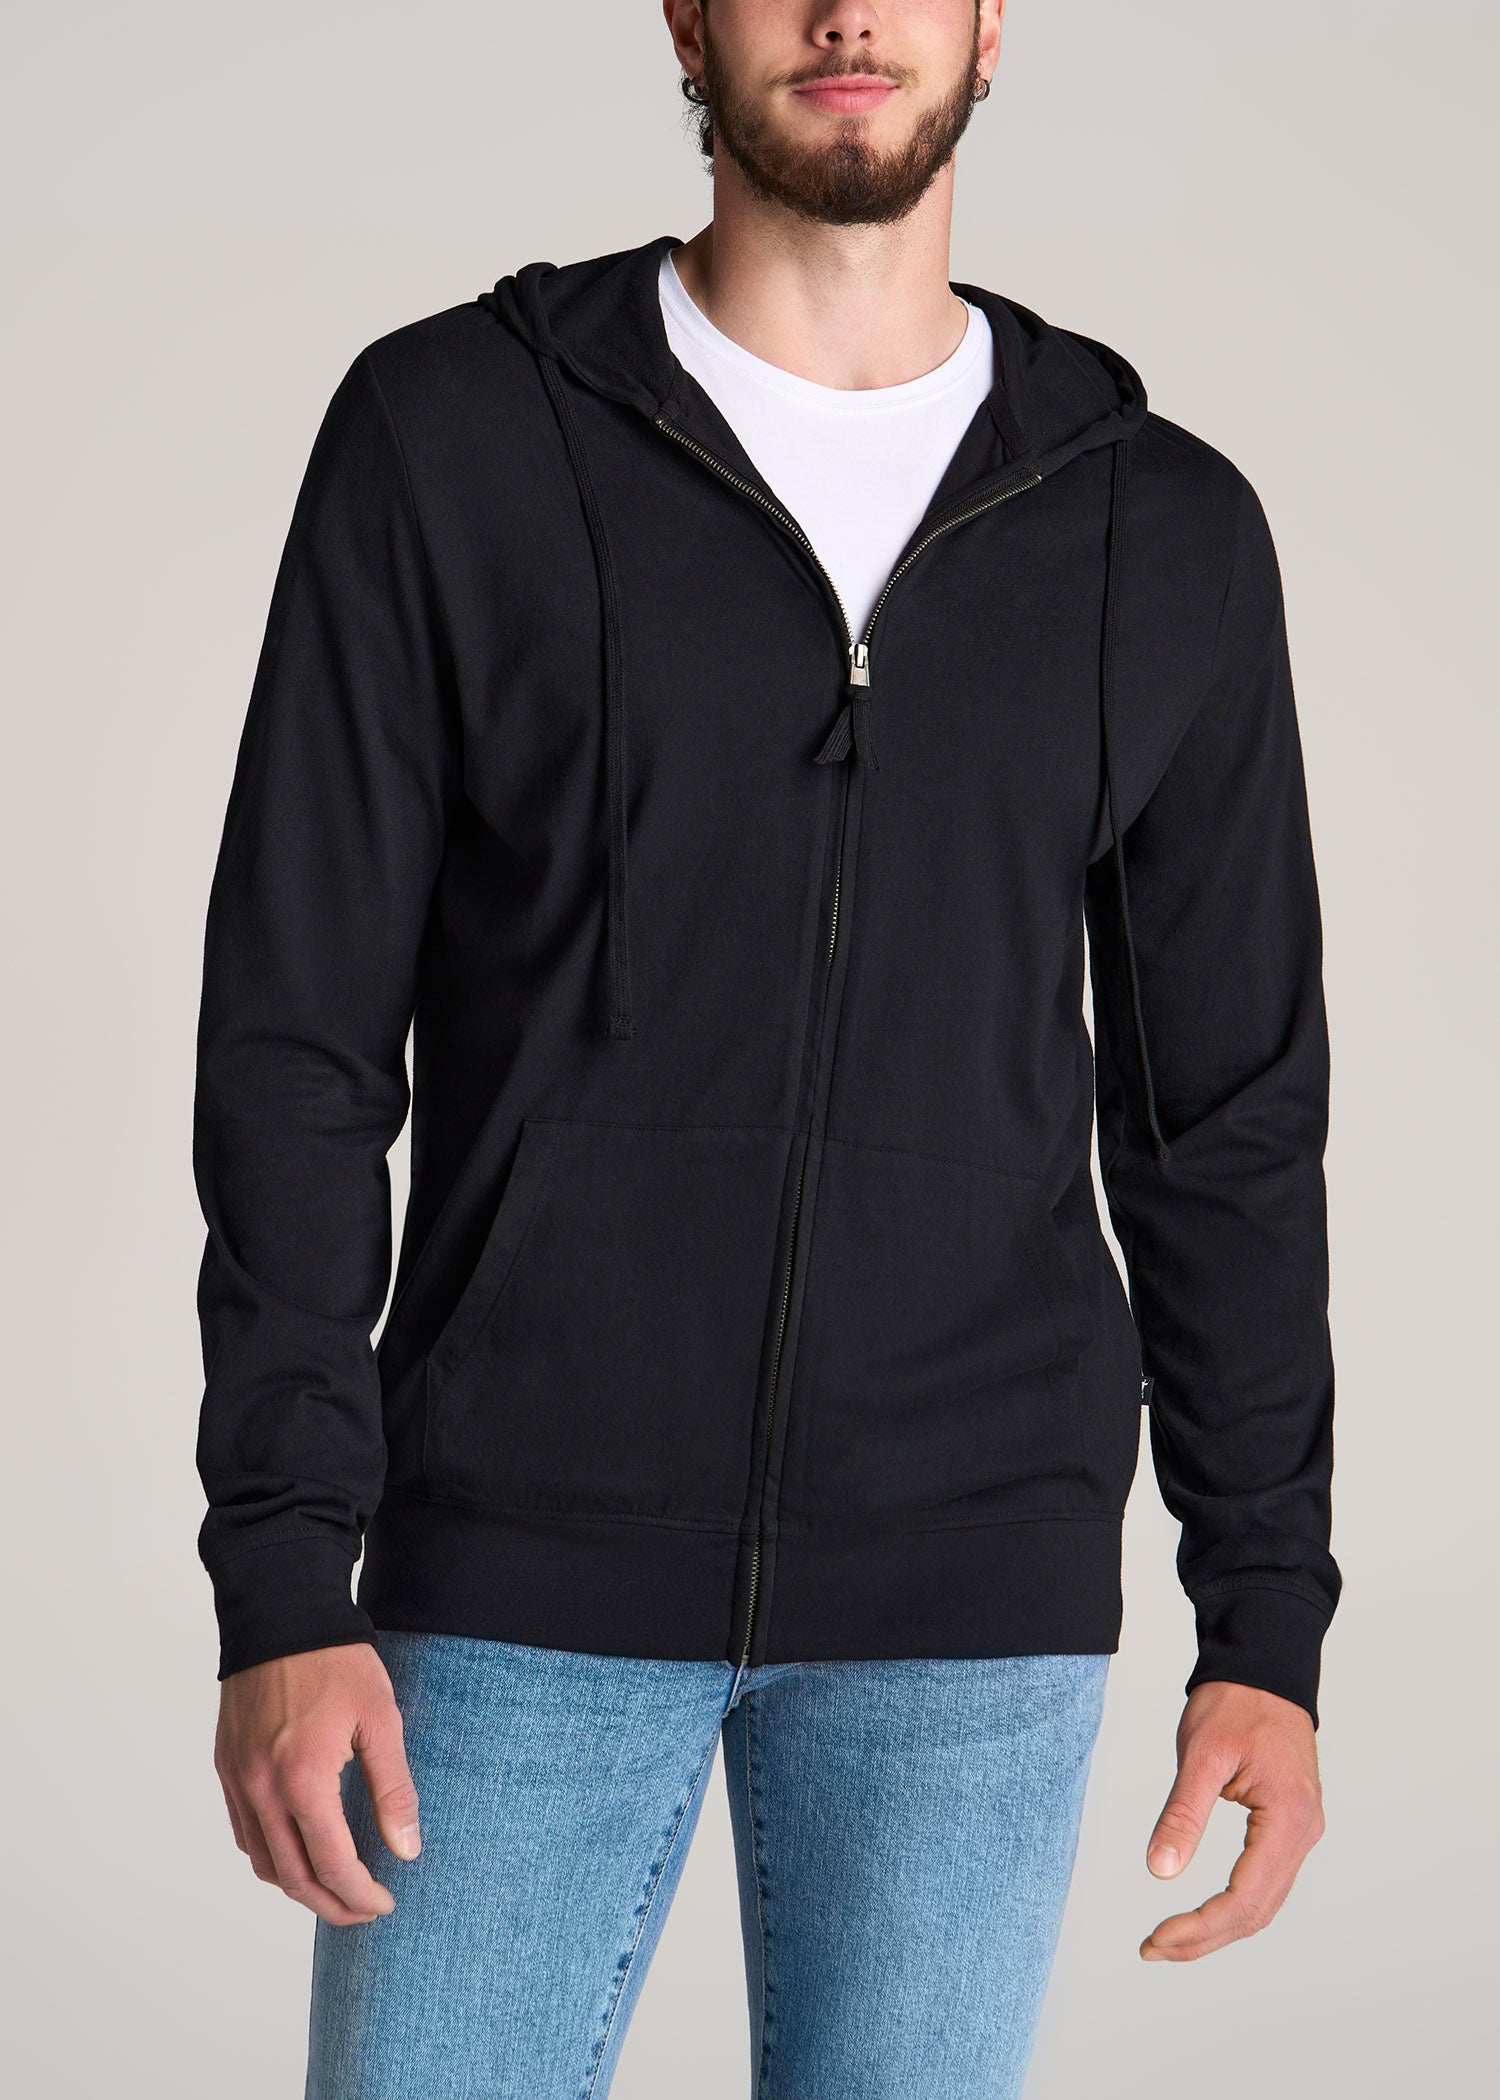 Long Sleeve Full Zip Jersey Hoodie for Tall Men in Black L / Extra Tall / Black